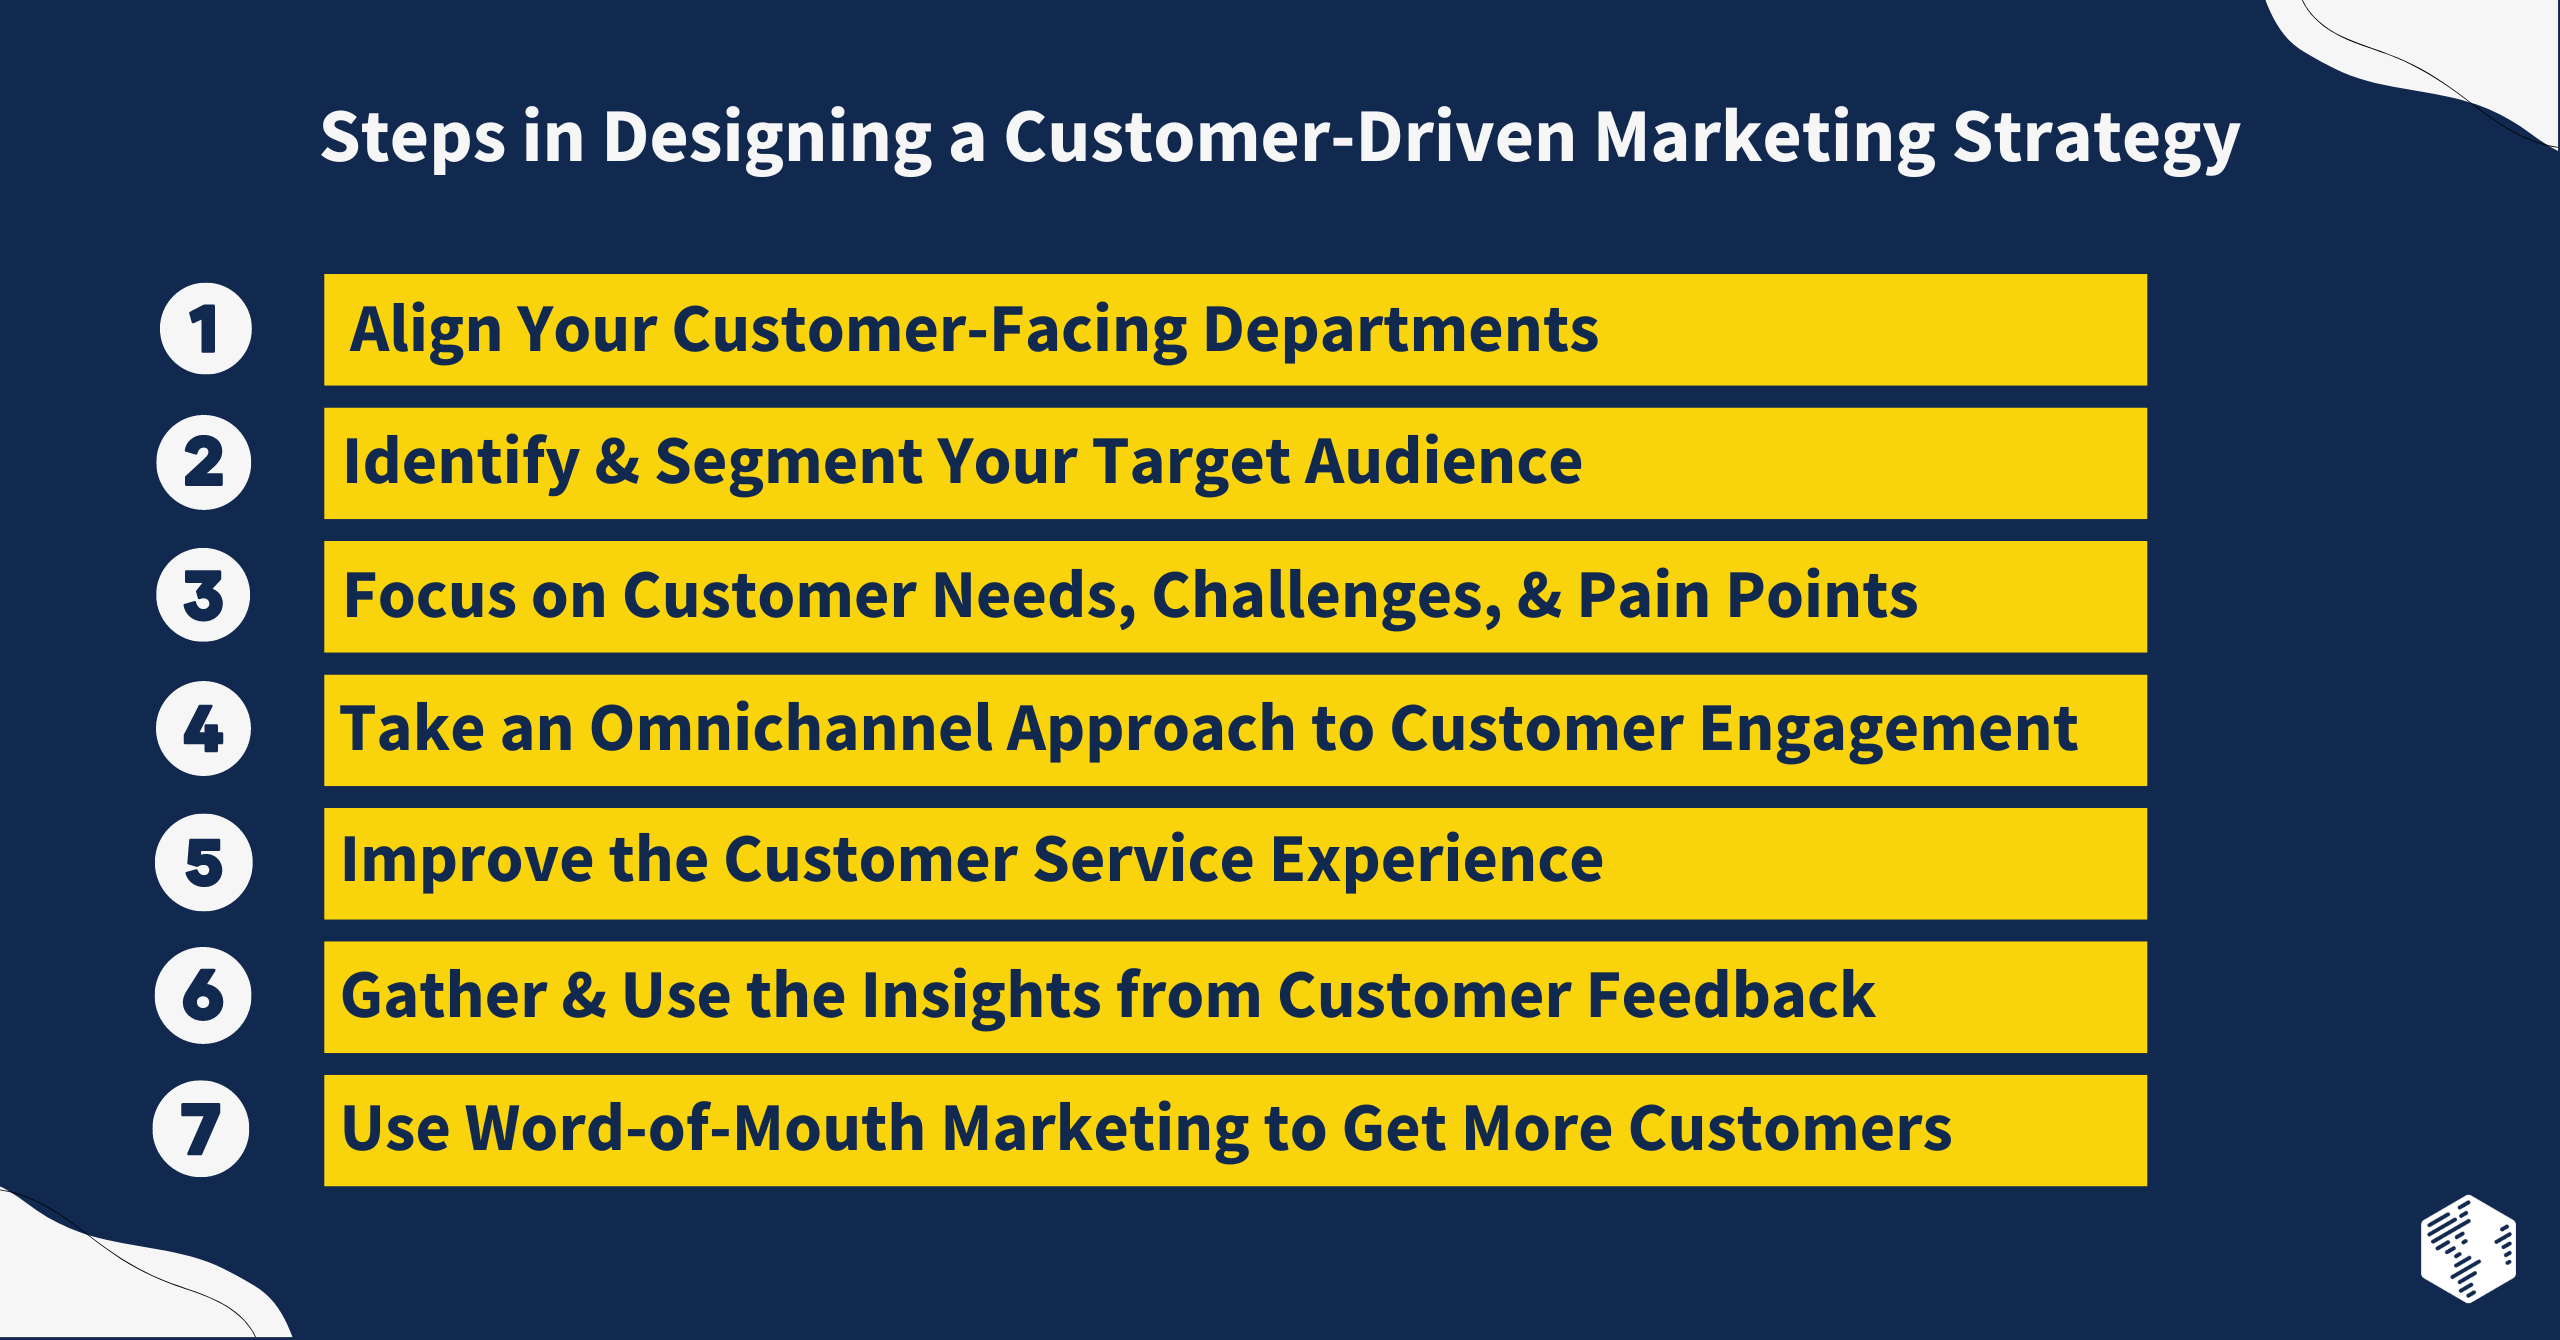 Steps in Designing a Customer-Driven Marketing Strategy